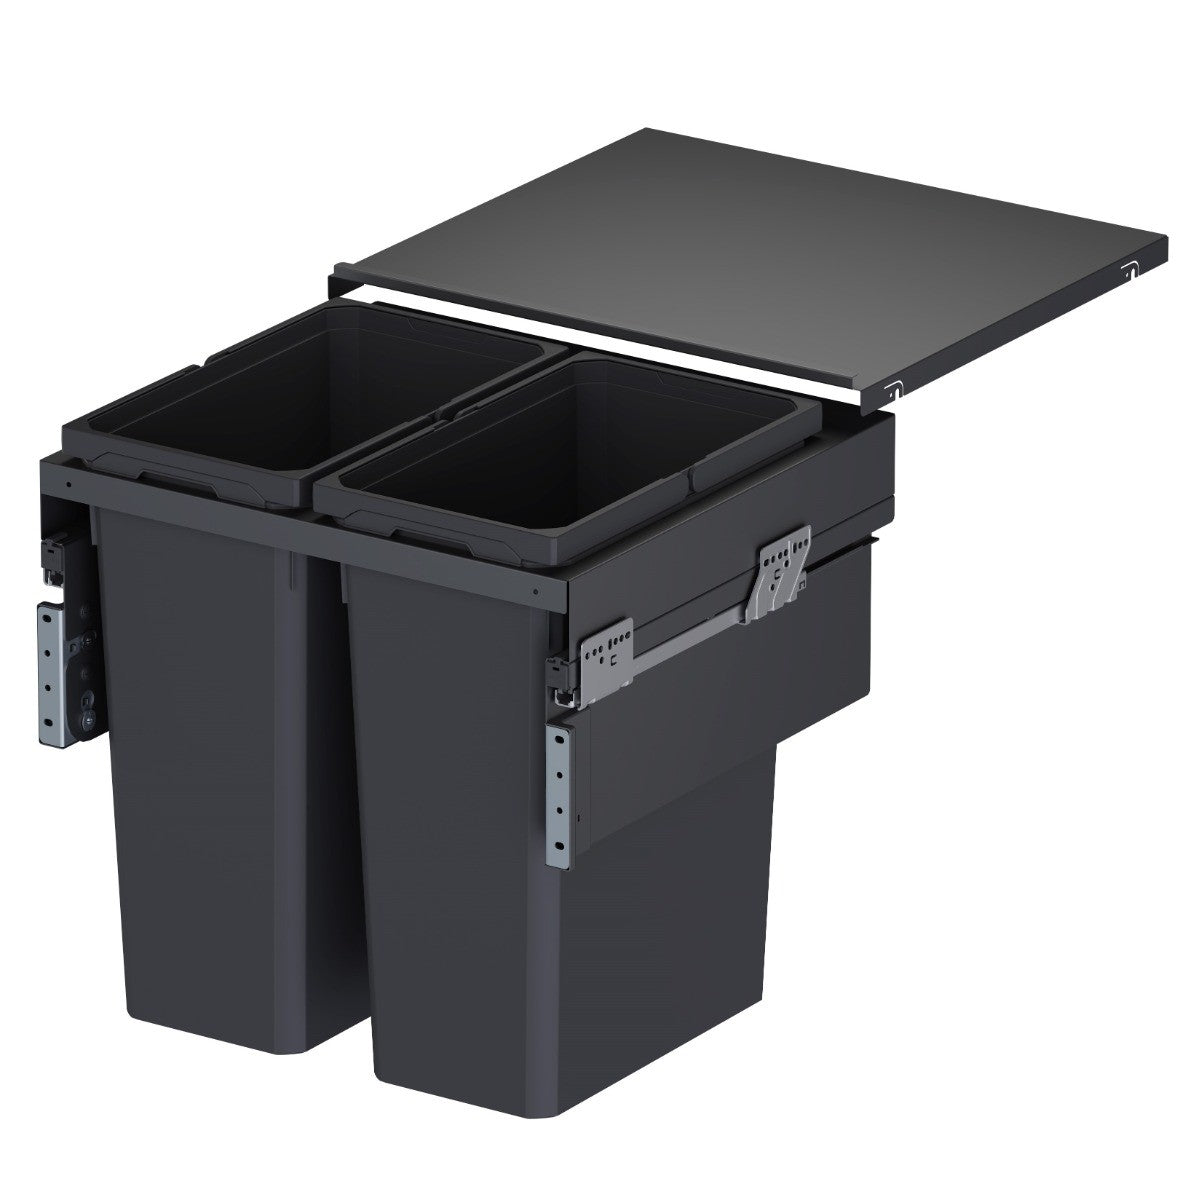 Vauth-Sagel integrated kitchen bin with two compartments, ideal for separating waste and recycling.